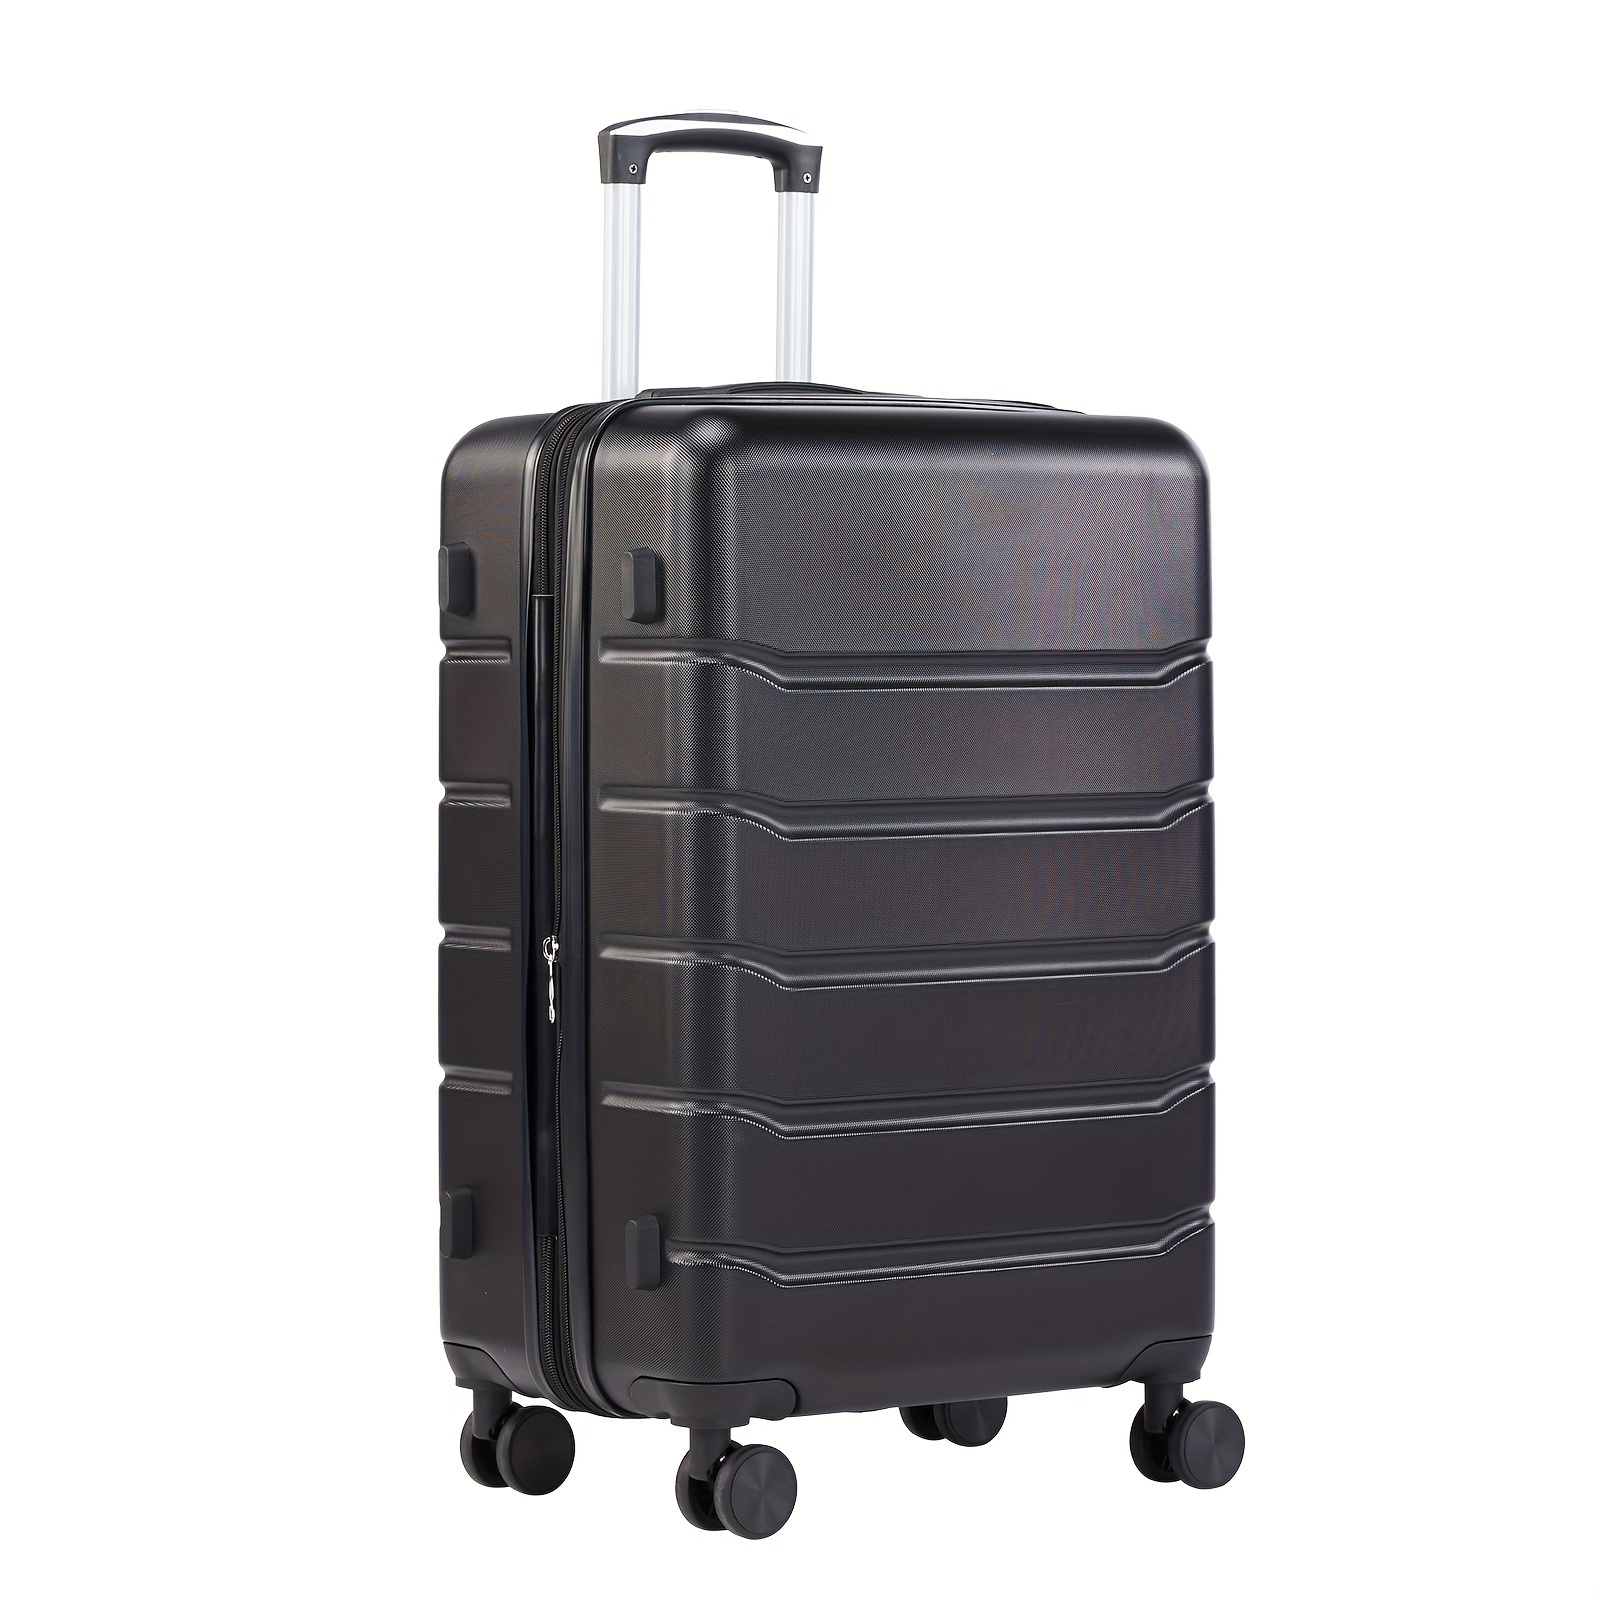 

Minimalist Solid Color Hard Shell Luggage Case, Large Capacity Travel Trolley Case With Spinner Wheels Design